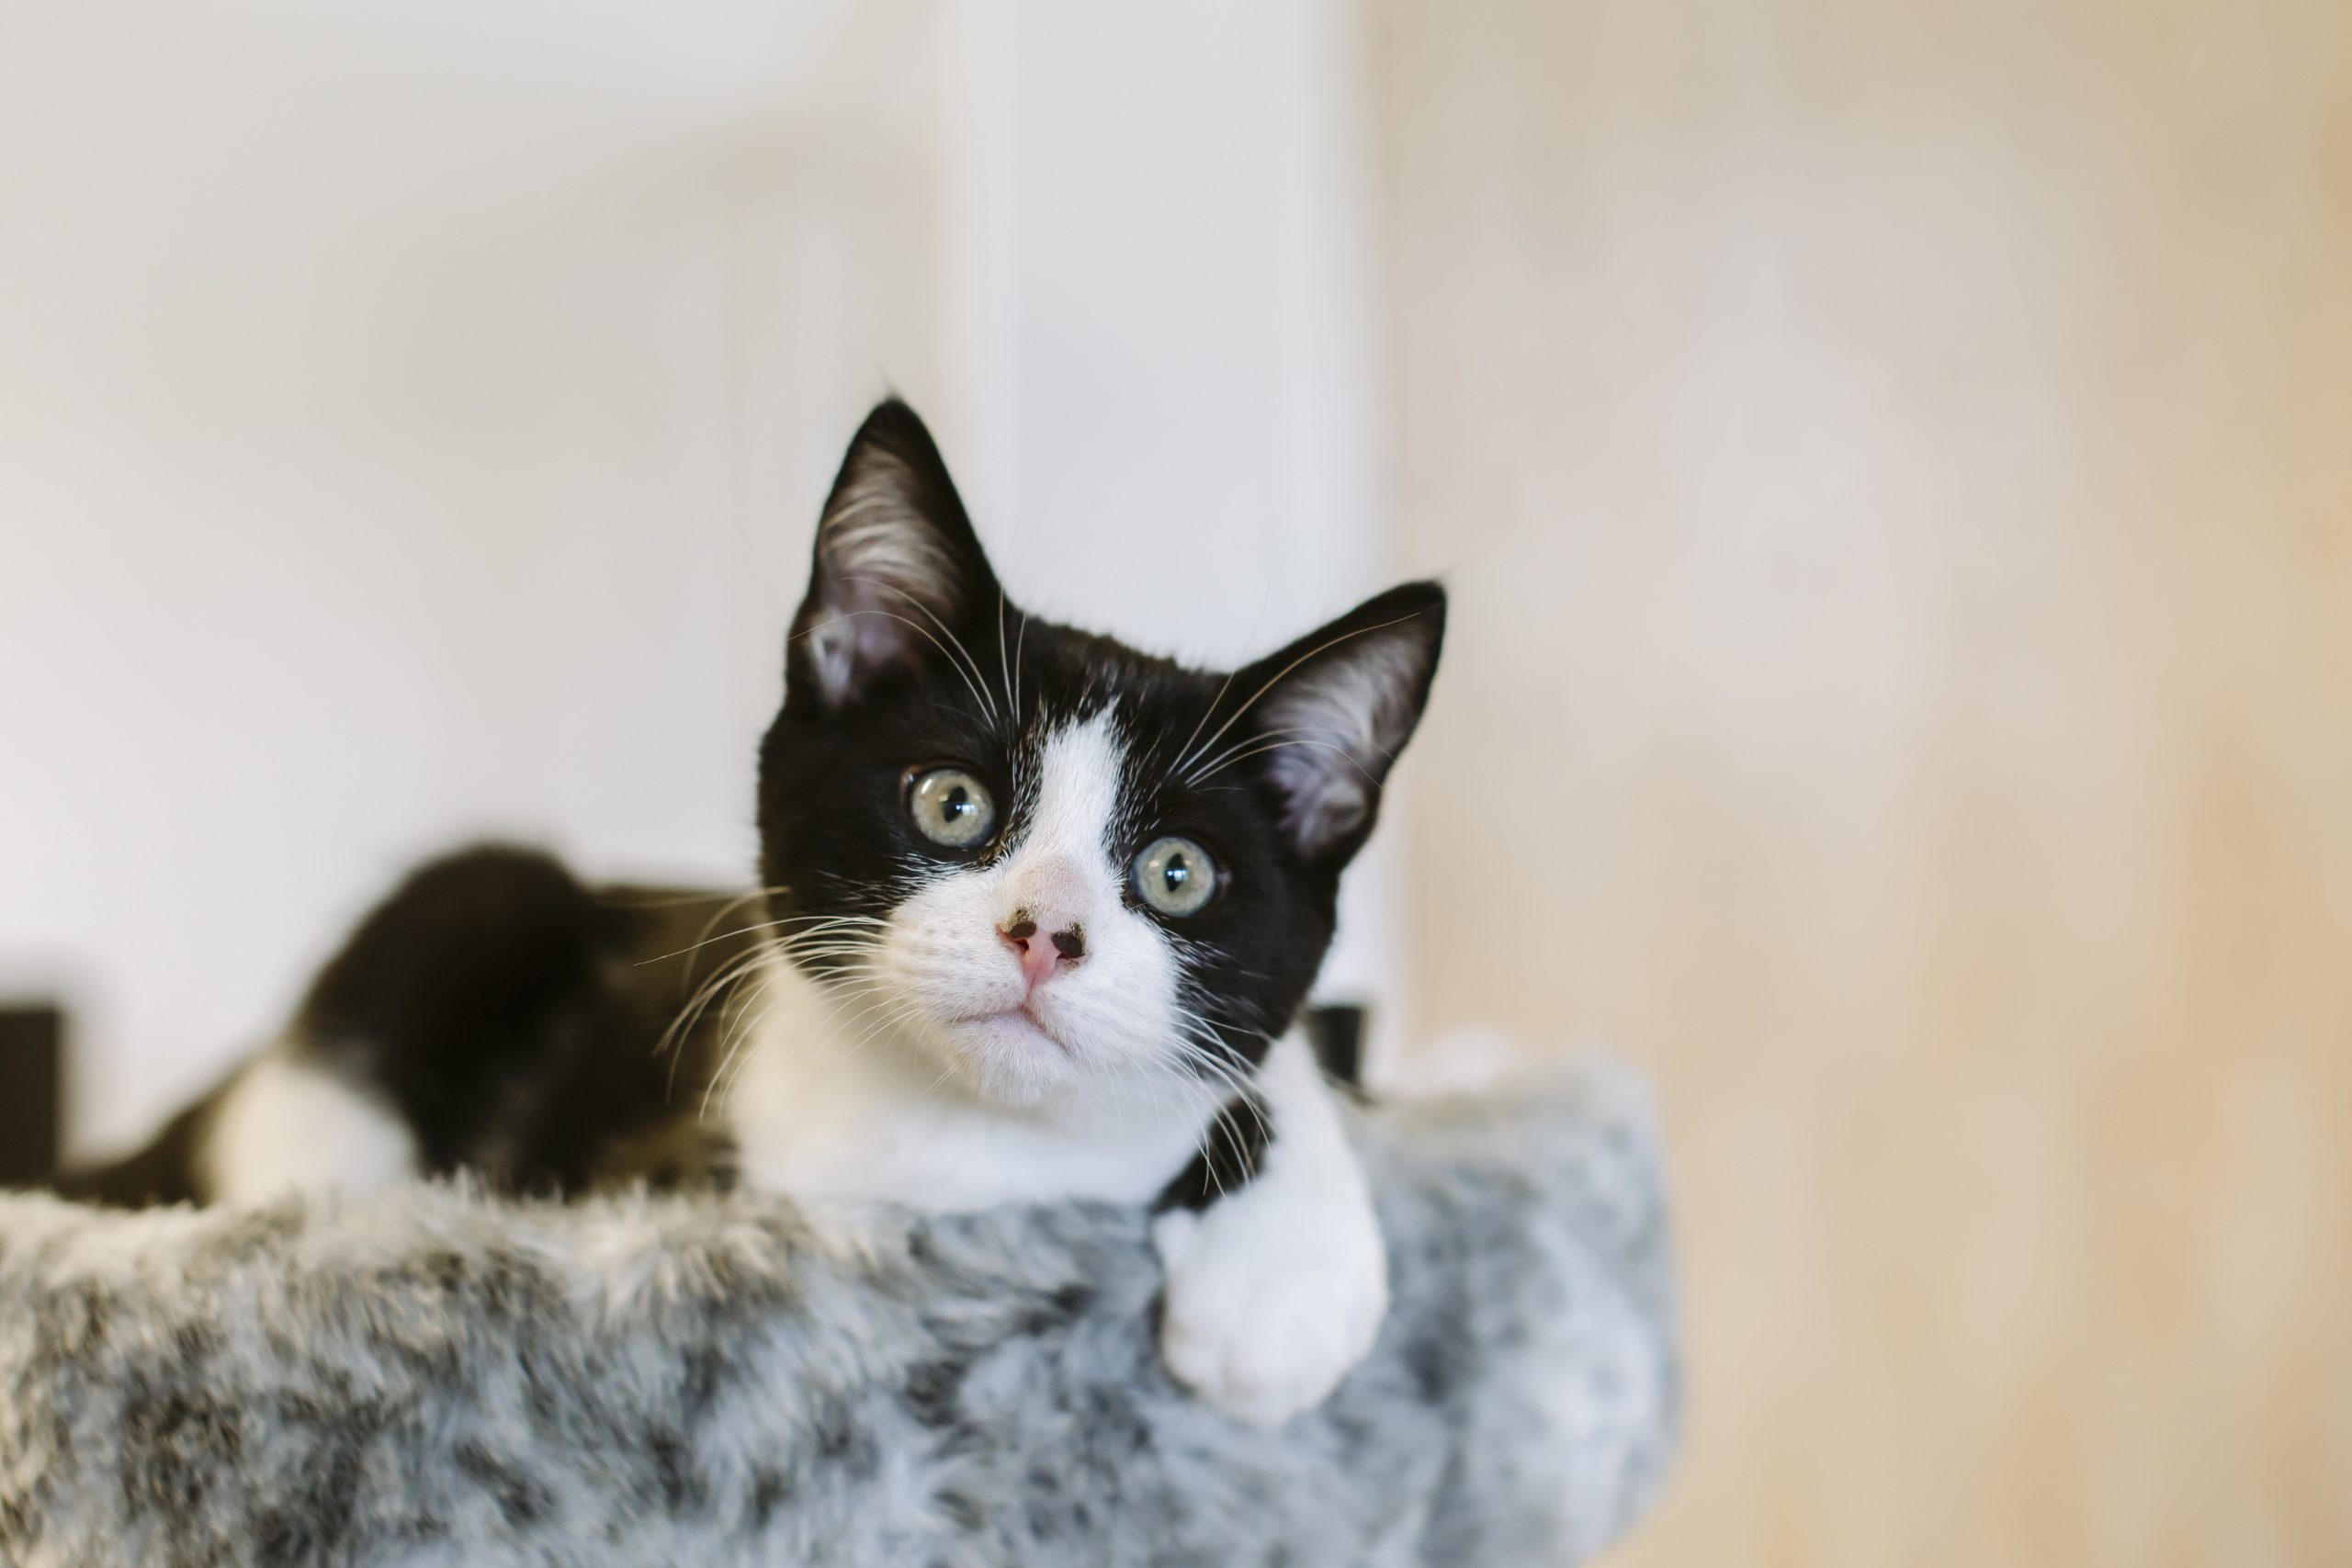 Debunking Myths: Can CBD Oil Make Your Cat High?